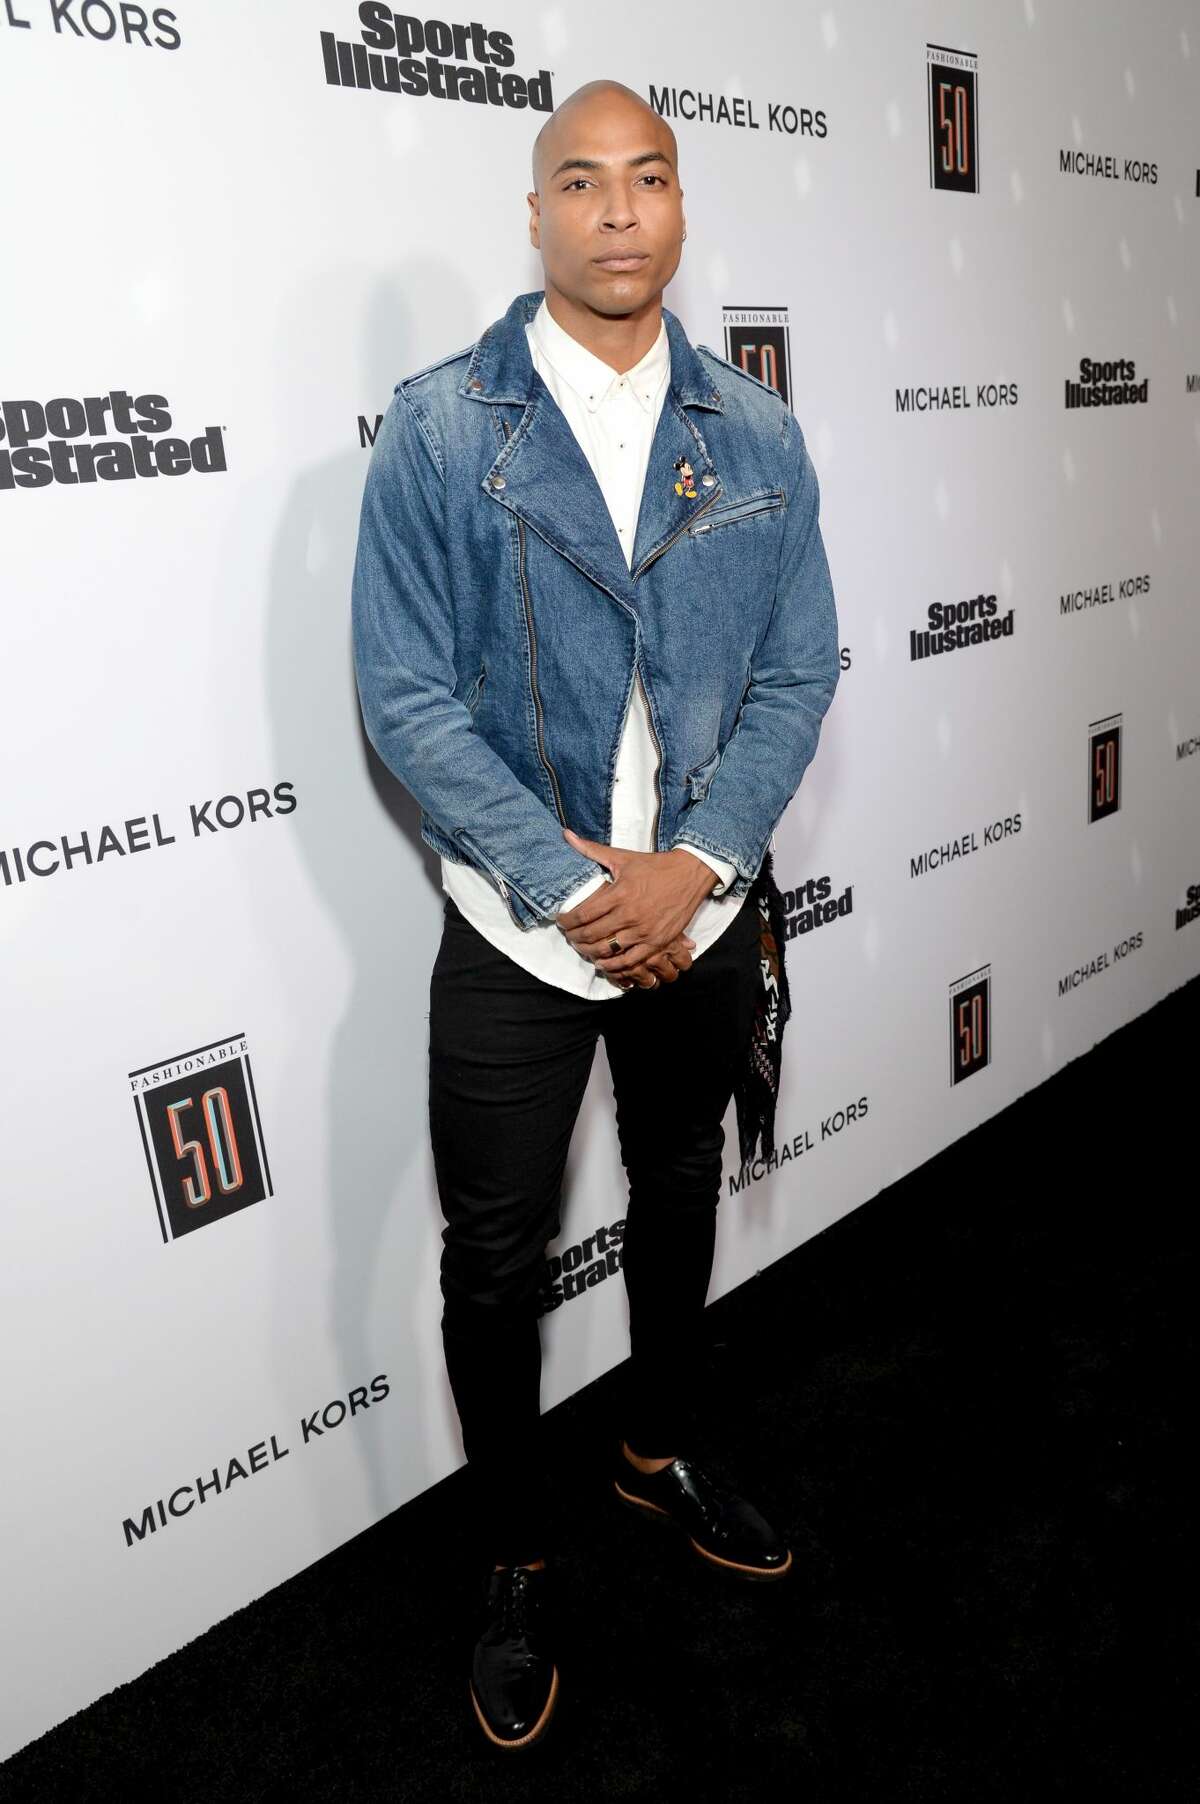 LOS ANGELES, CA - JULY 18: Dorion Renaud at Sports Illustrated 2017 Fashionable 50 Celebration at Avenue on July 18, 2017 in Los Angeles, California. (Photo by Michael Kovac/Getty Images for SPORTS ILLUSTRATED)